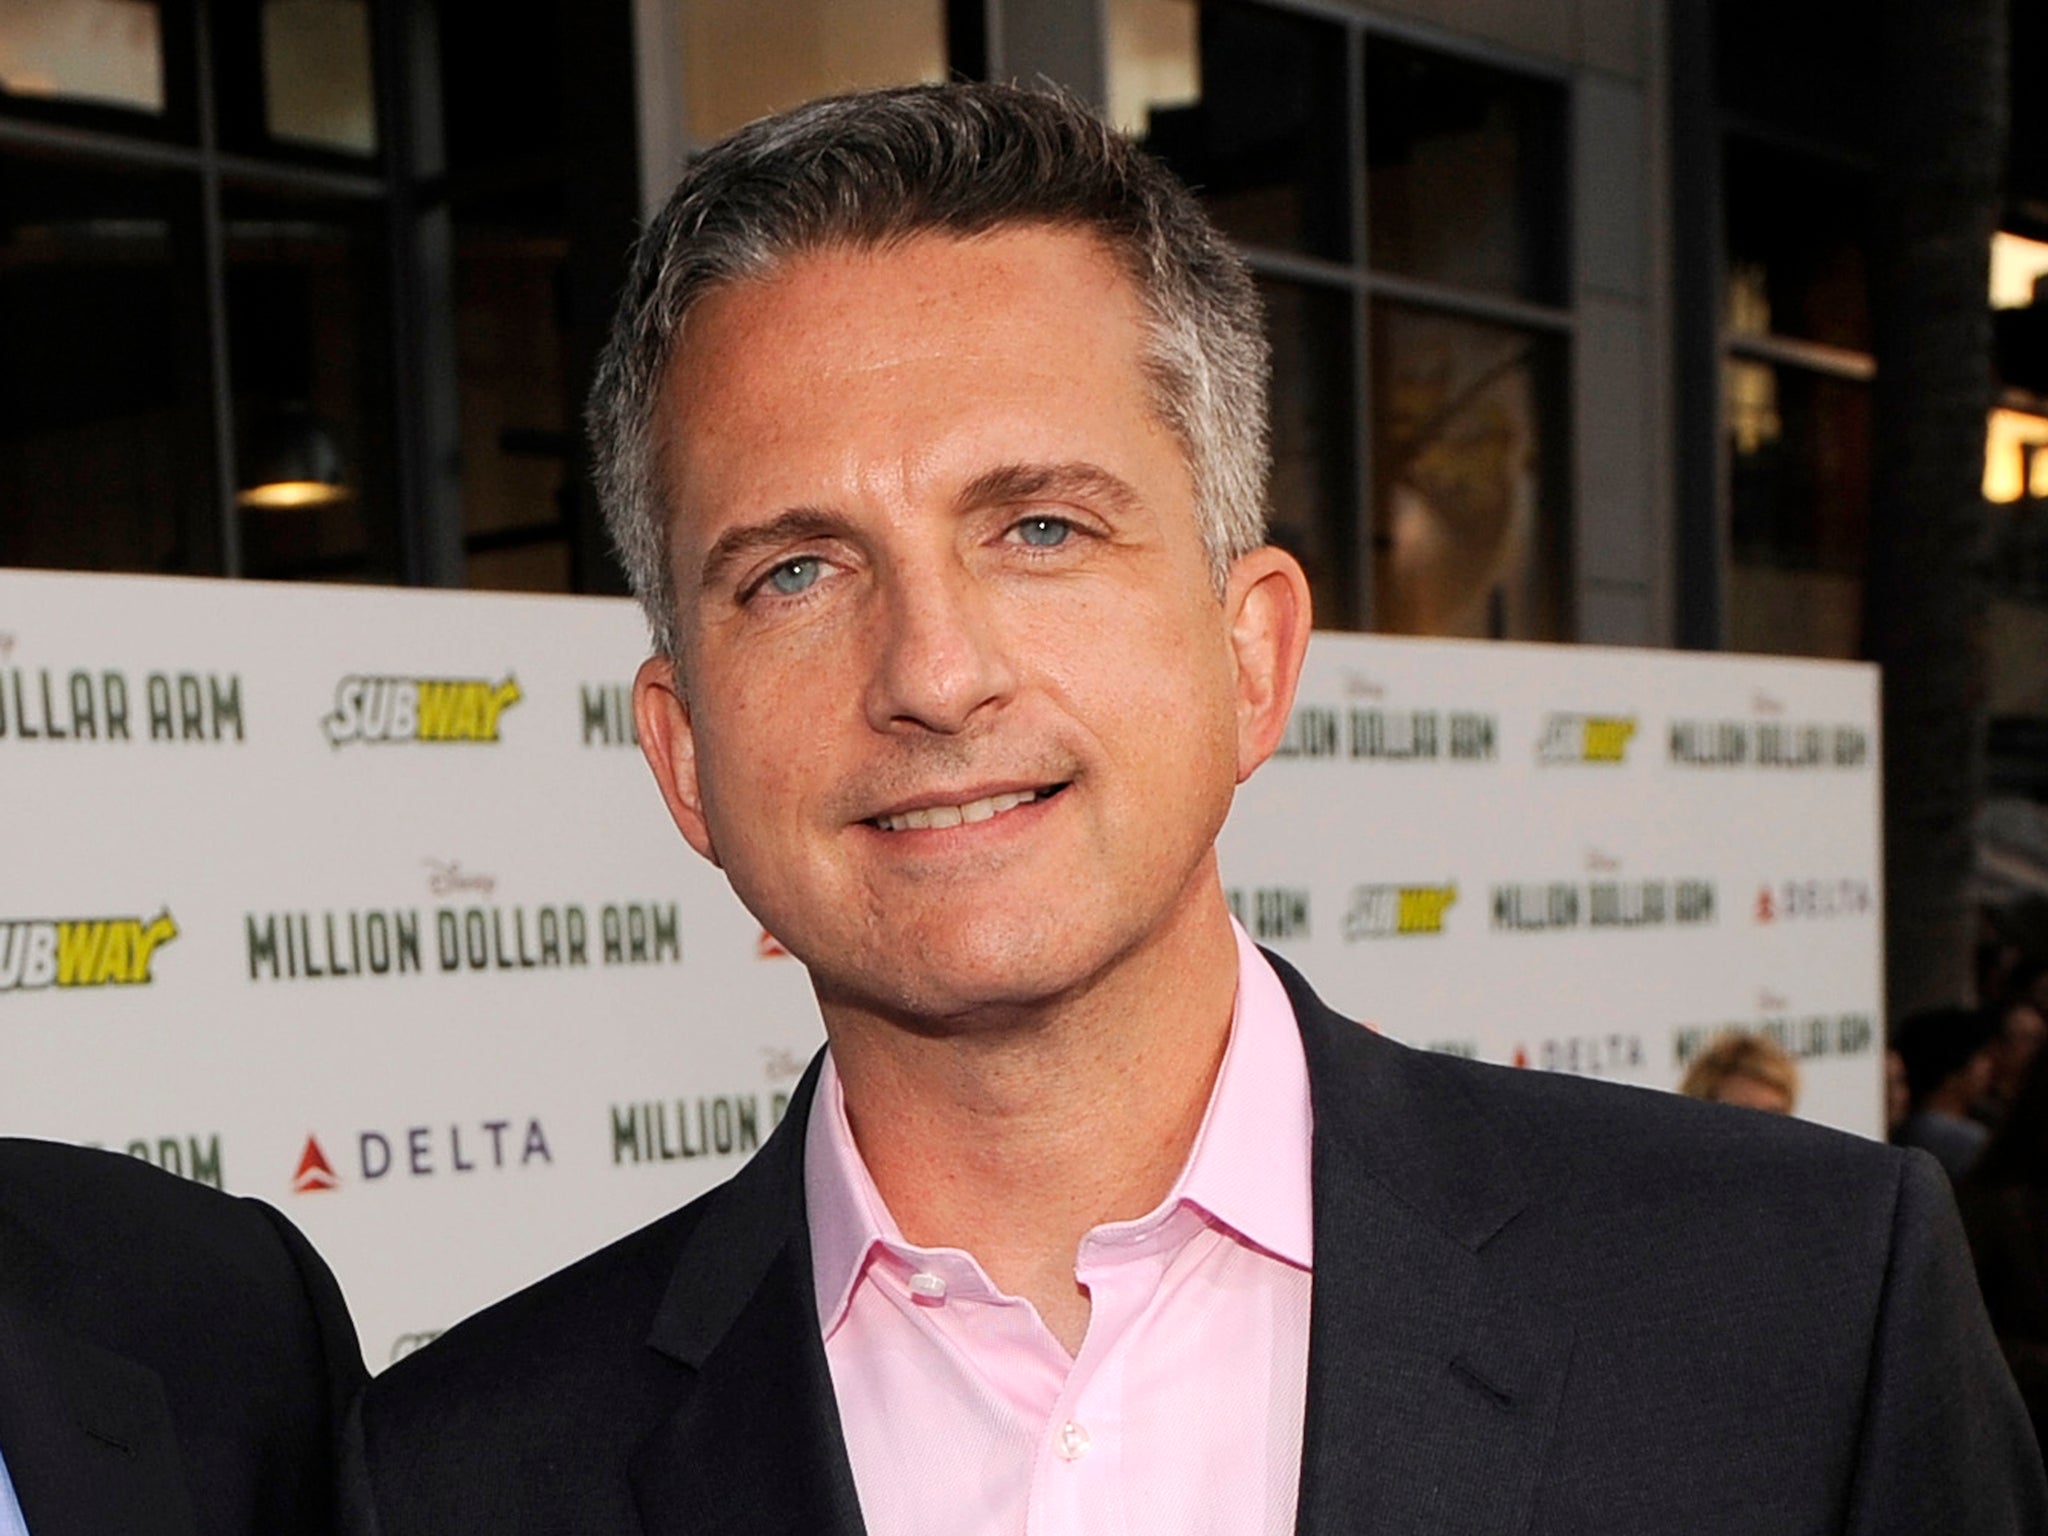 Sports analyst and personality Bill Simmons